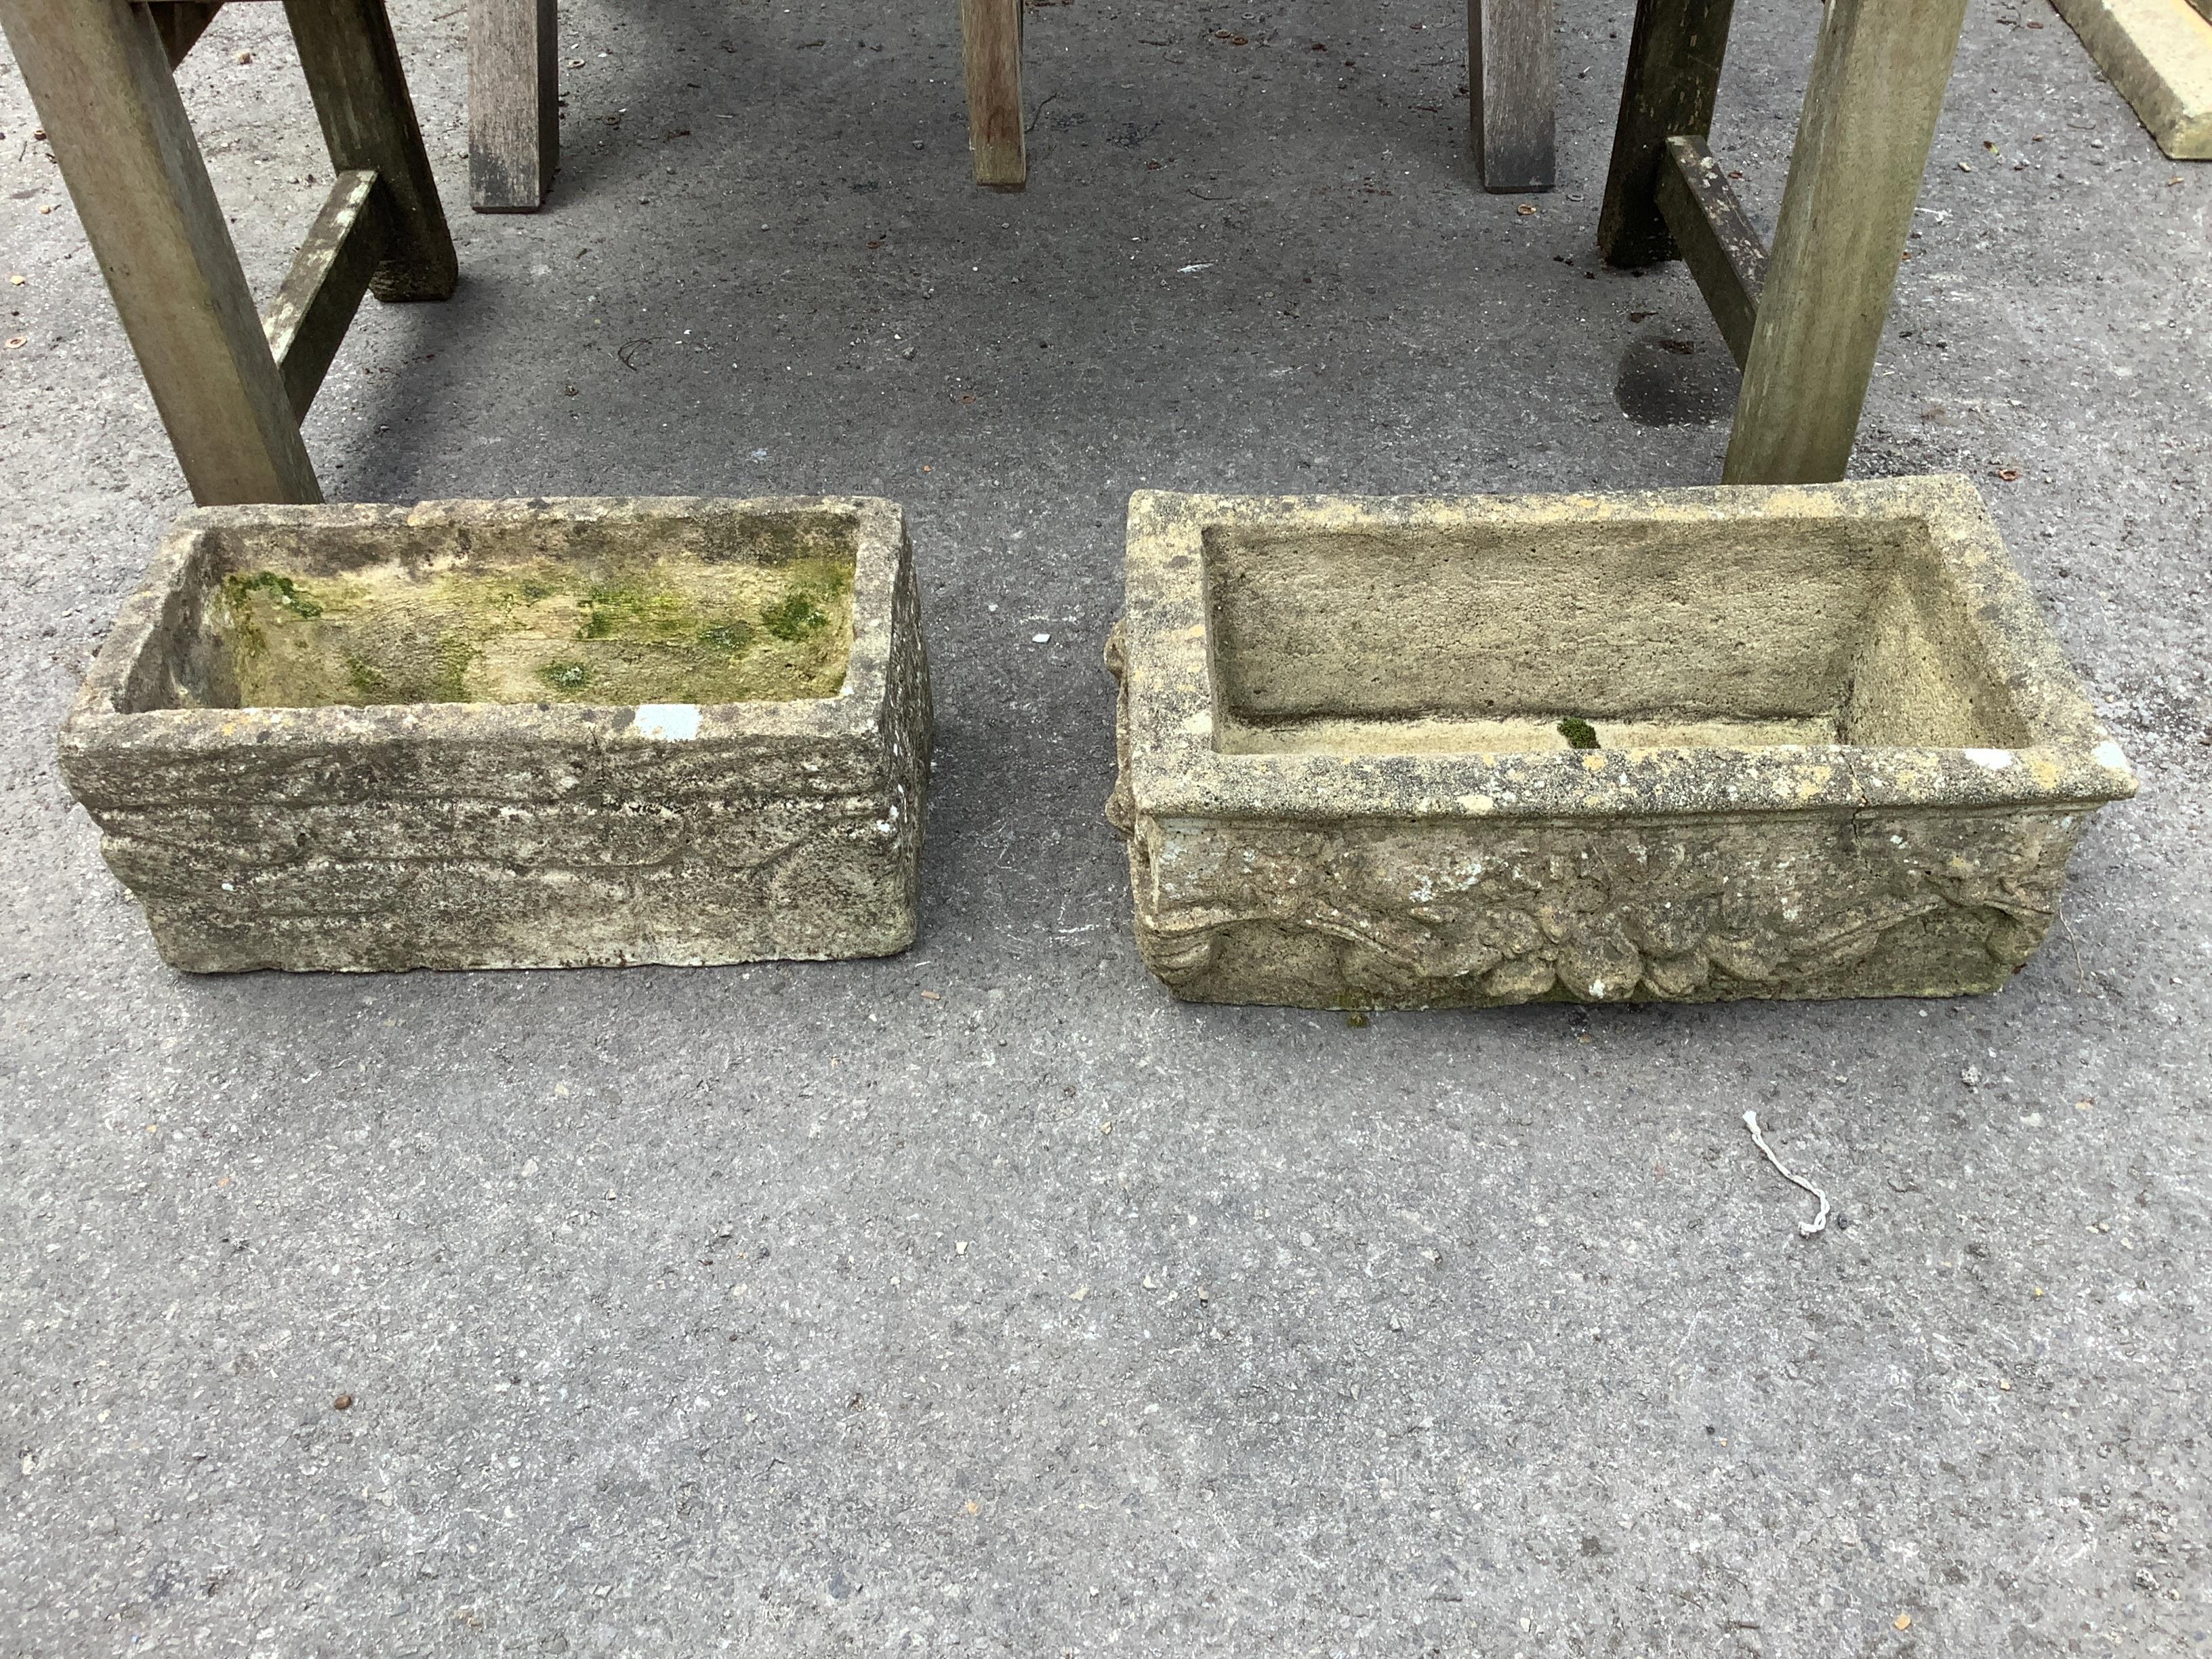 Two rectangular reconstituted stone trough garden planters, larger width 53cm, height 19cm